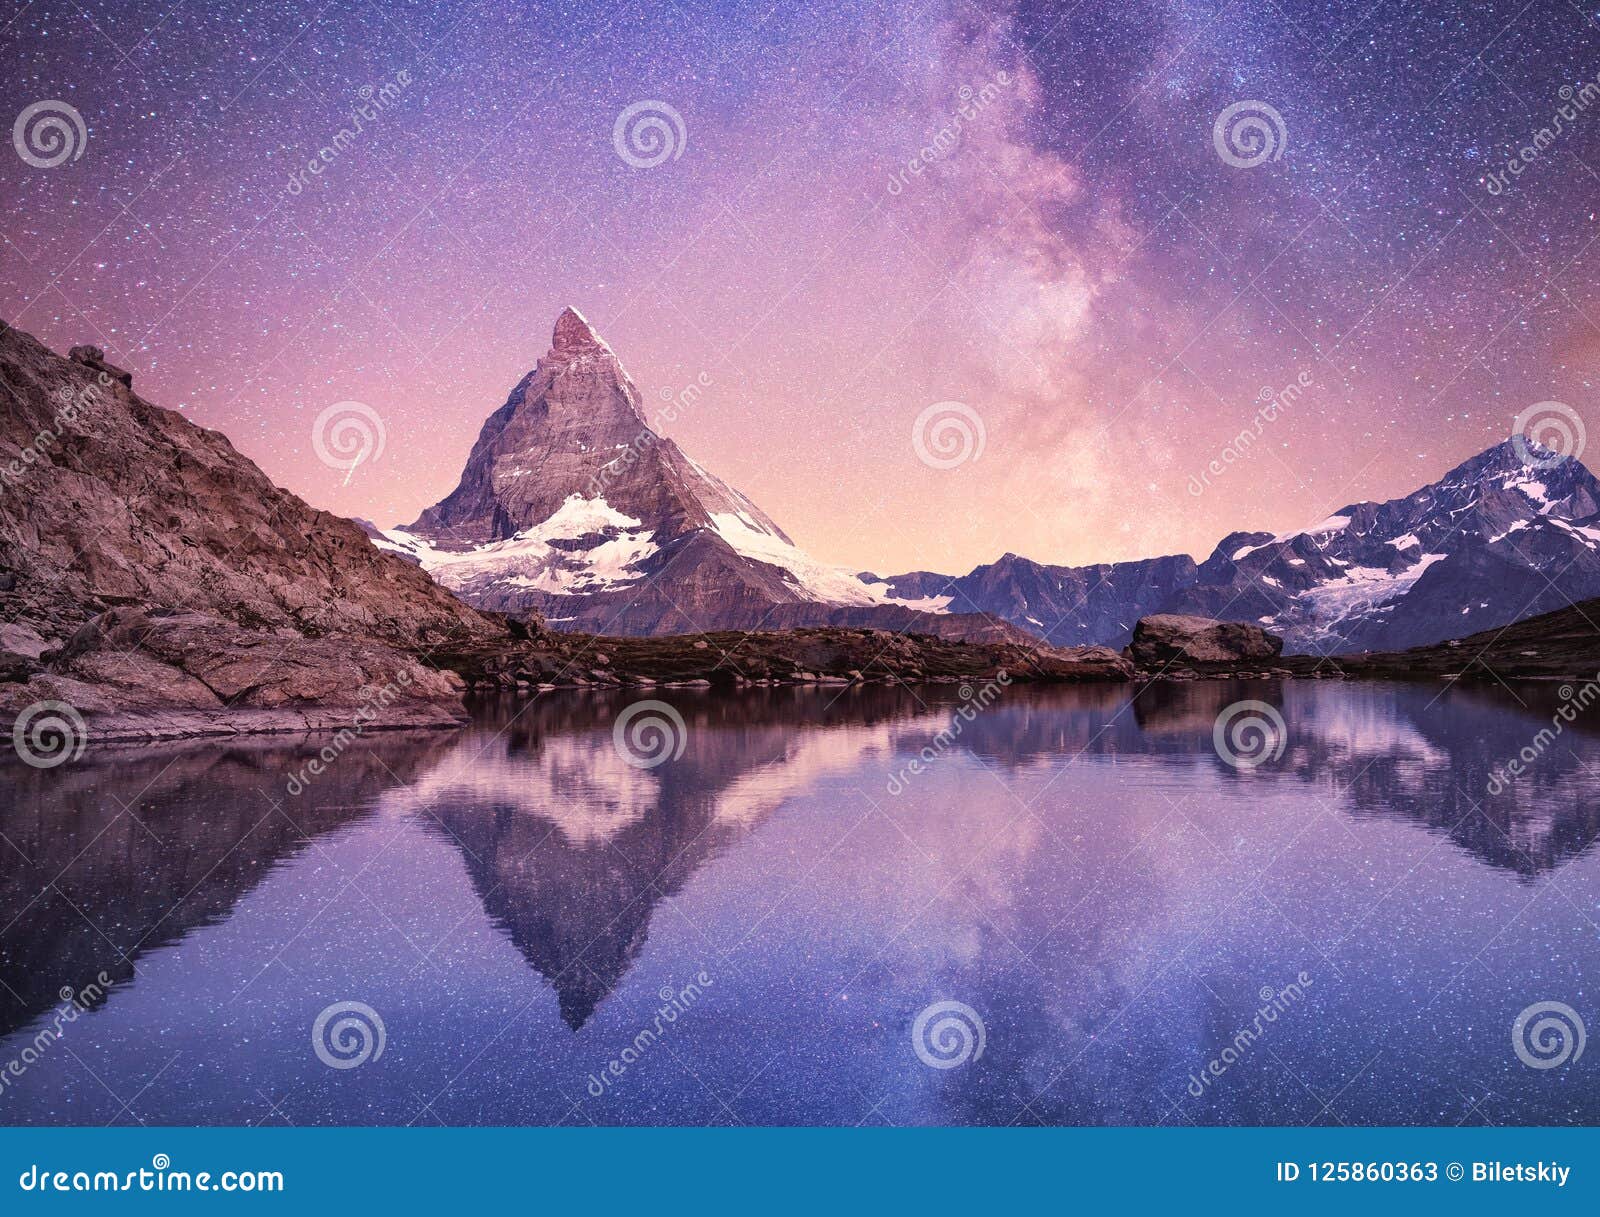 matterhorn and reflection on the water surface at the night time. milky way above matterhorn, switzerland.